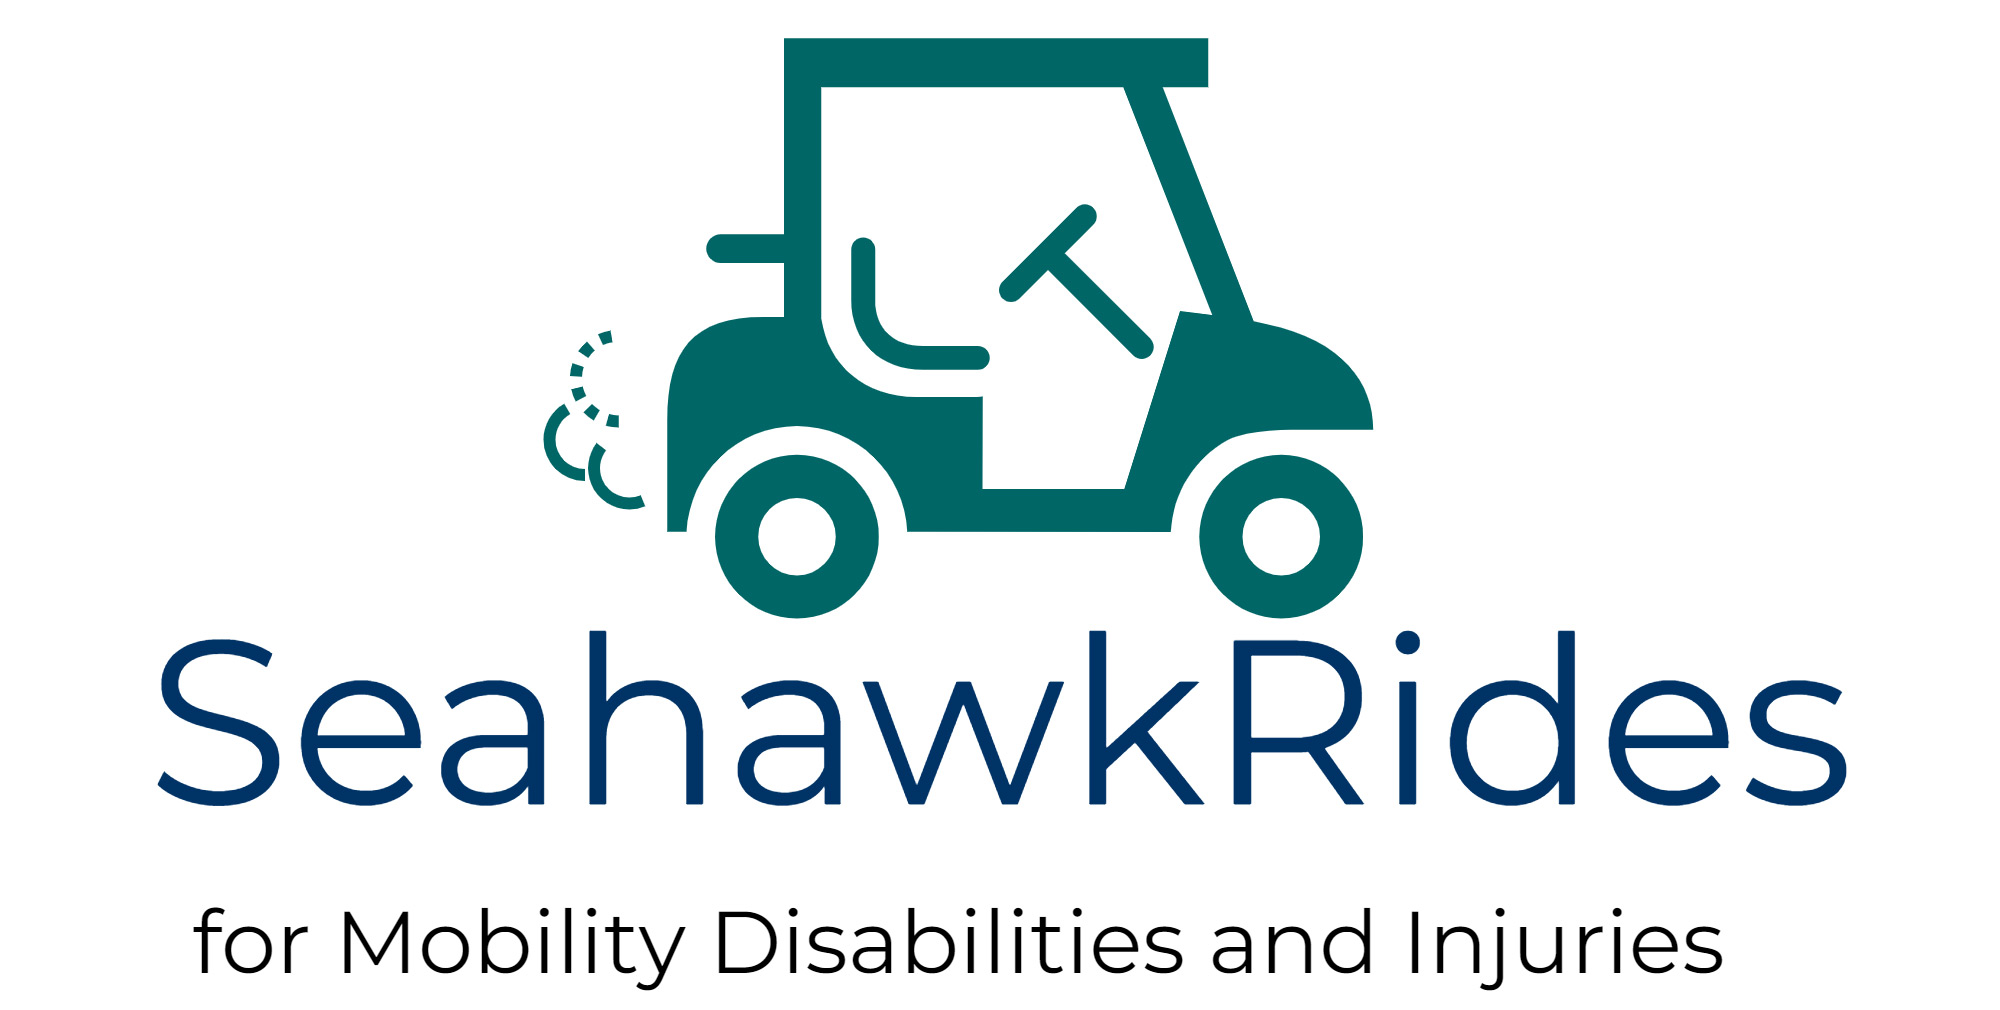 Seahawk Rides for mobility disabilities & injuries